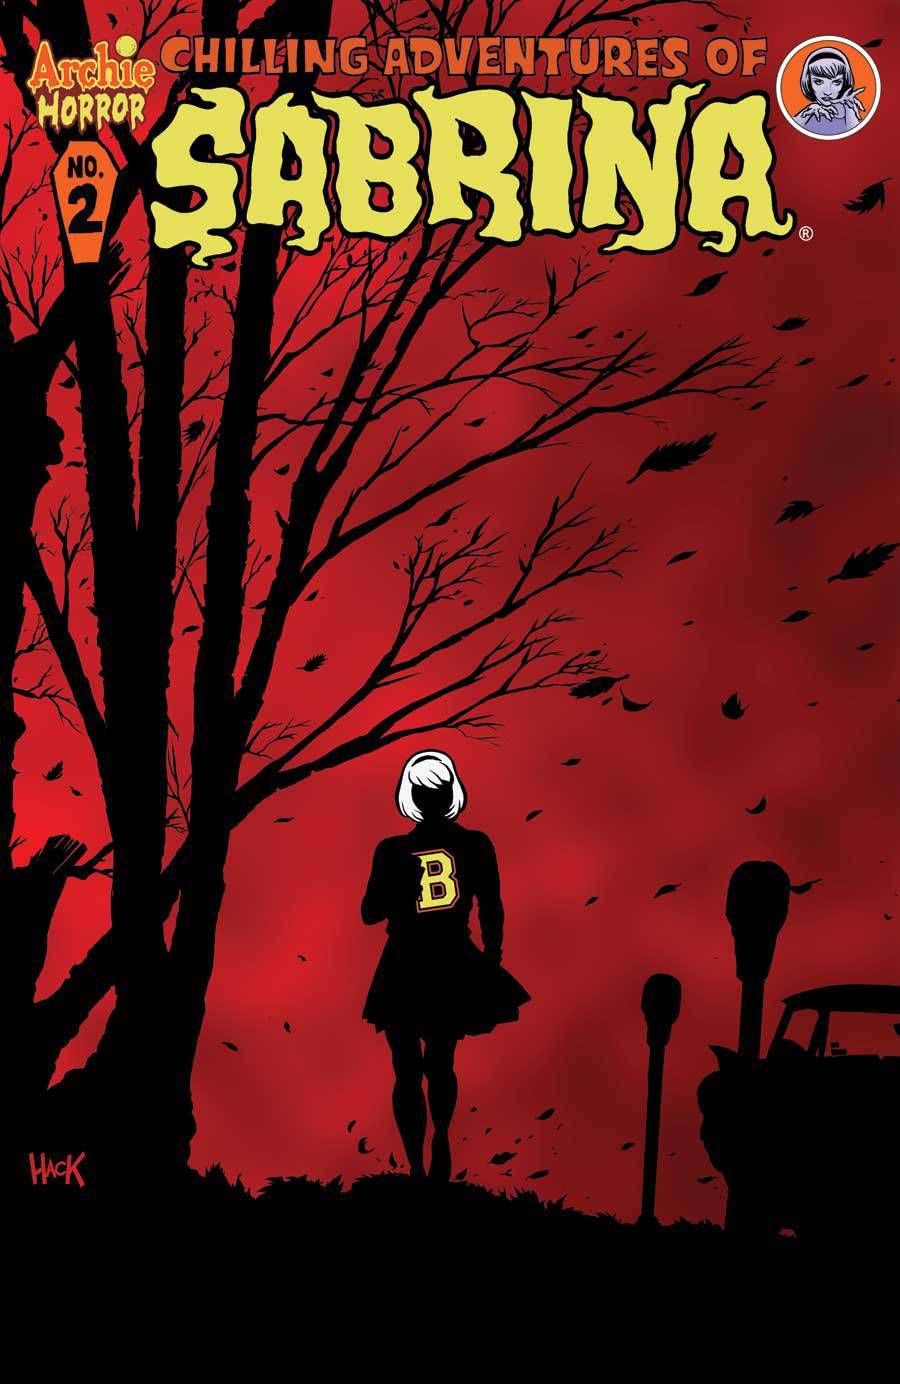 The Chilling Adventures of Sabrina No 2